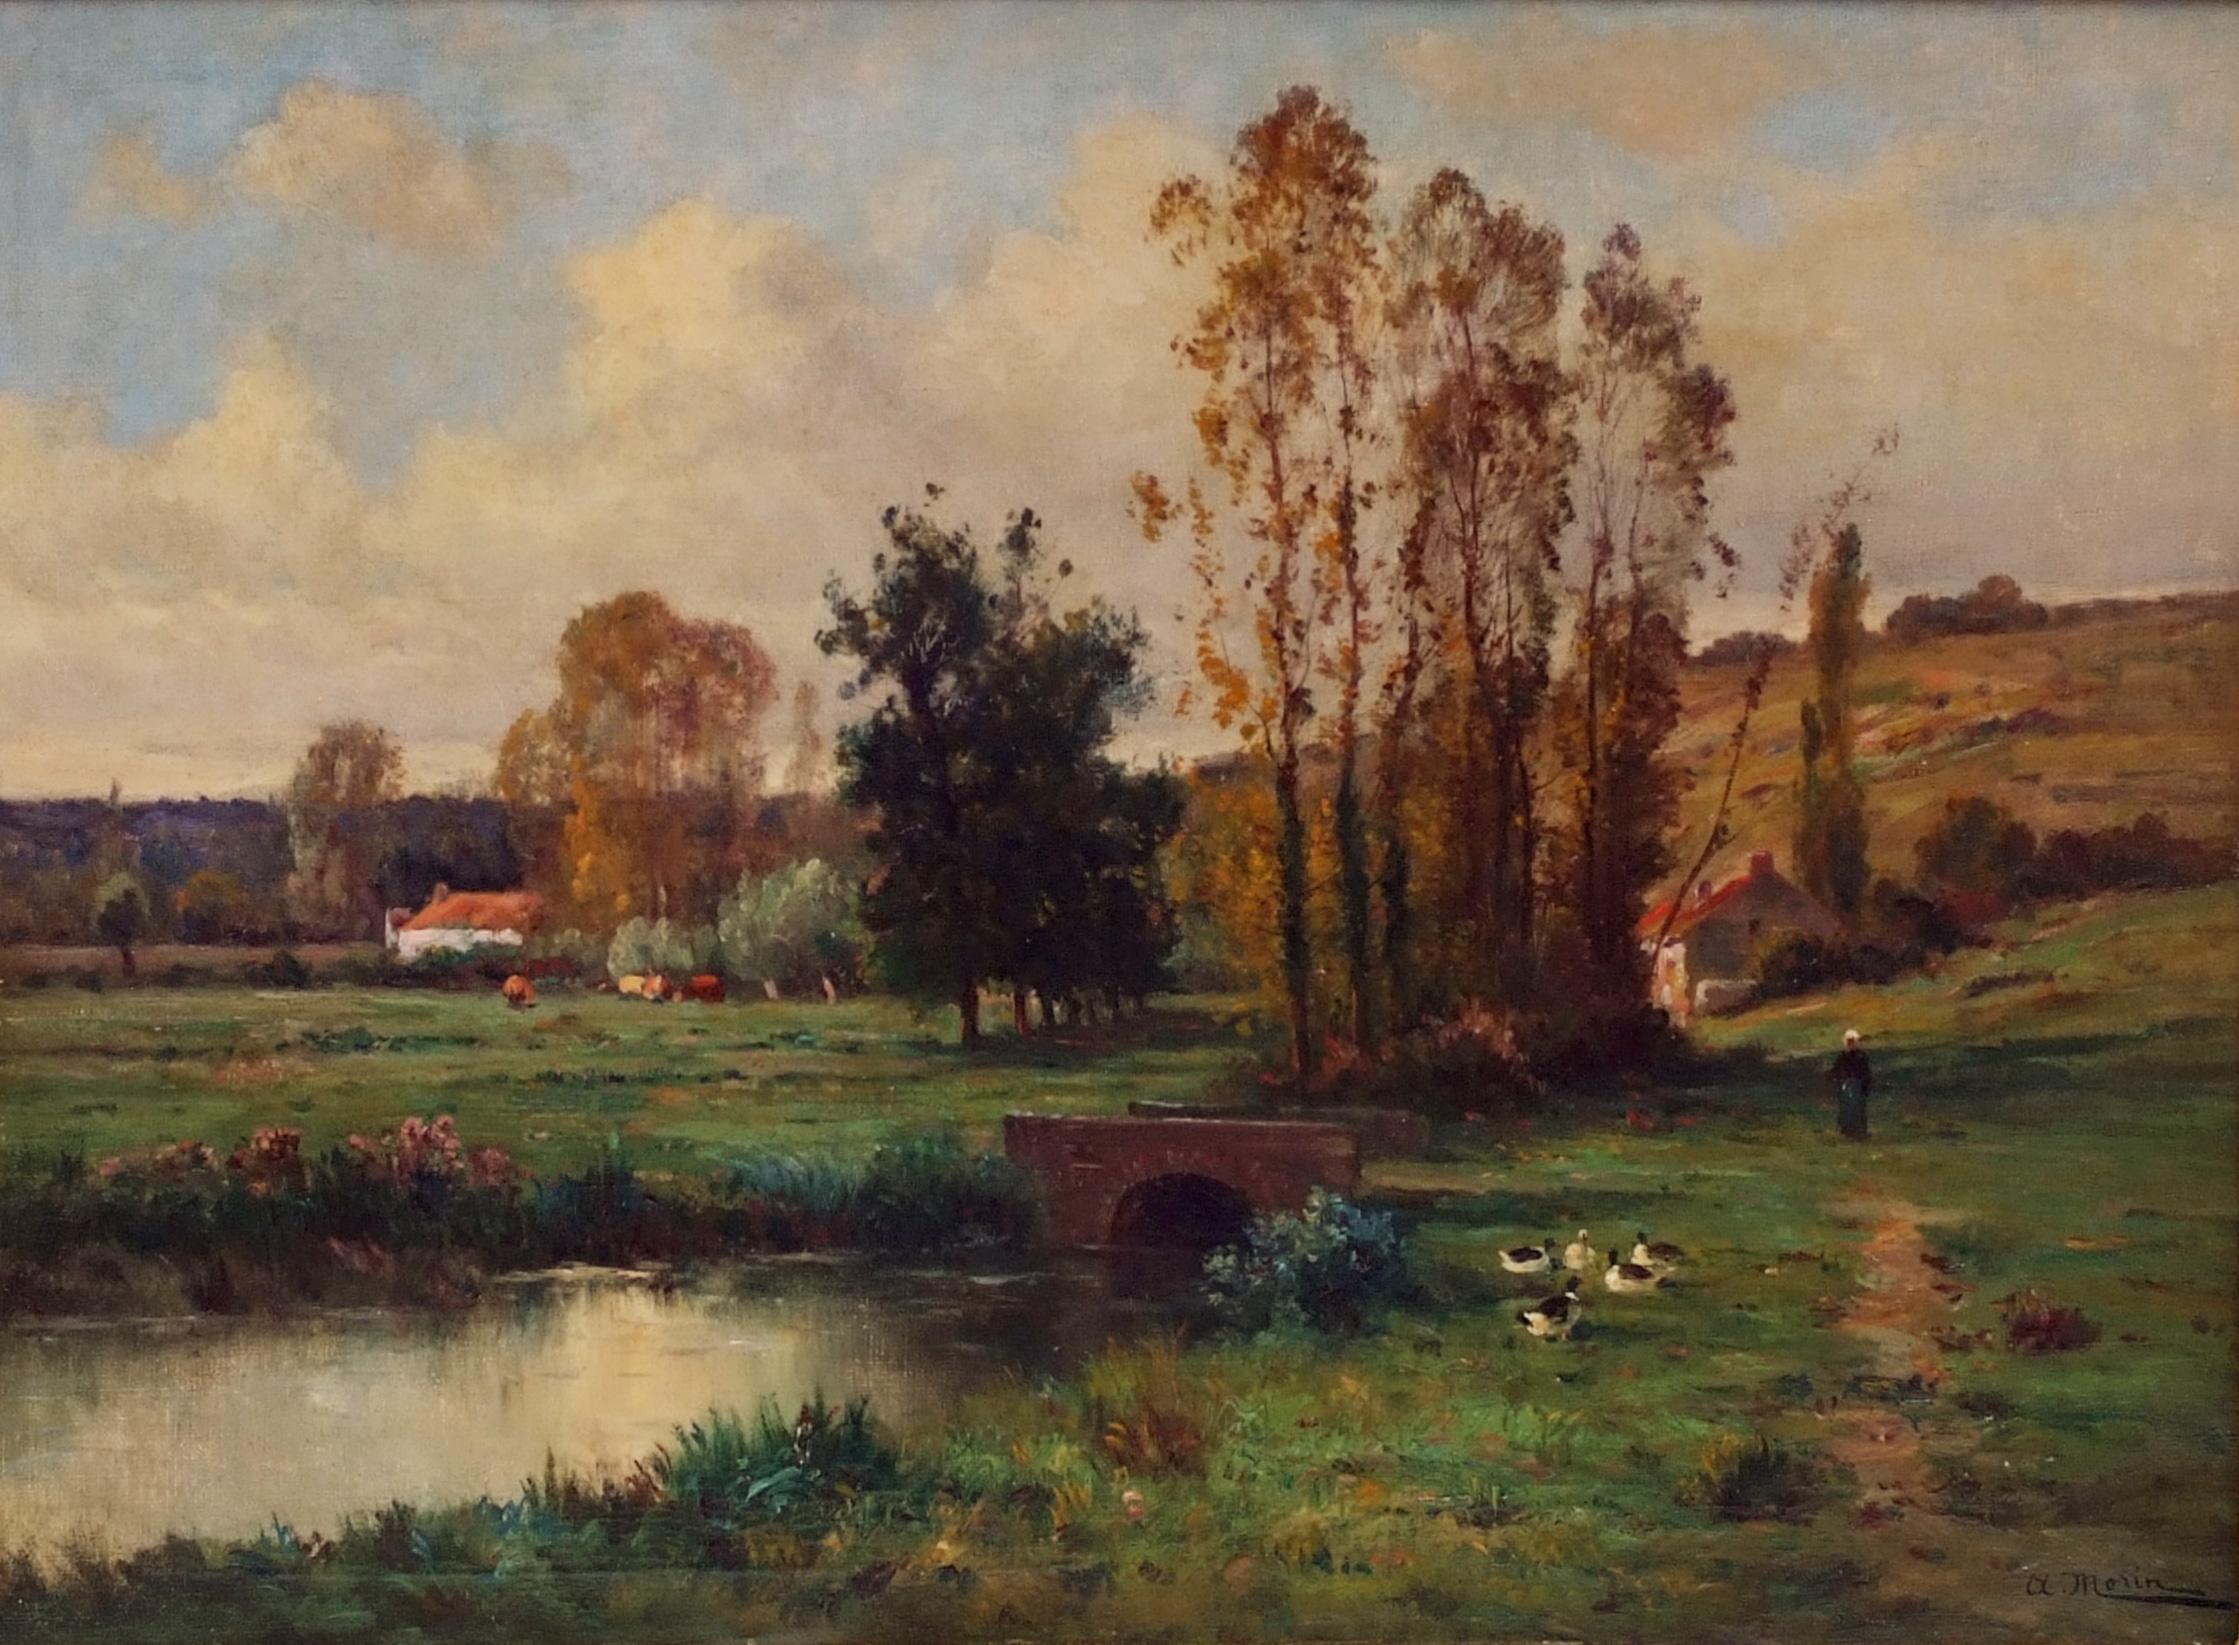 MORIN Charles Camille (1846 – 1919)  
Landscape by the pond 
Oil on canvas signed low right 
Old frame gilded with leaves 
Dim canvas : 73 X 54 cm Dim frame : 85 X 65 cm

MORIN Adolphe (1841-c.1880)
French painter born in Stenay (Meuse) in 1841.